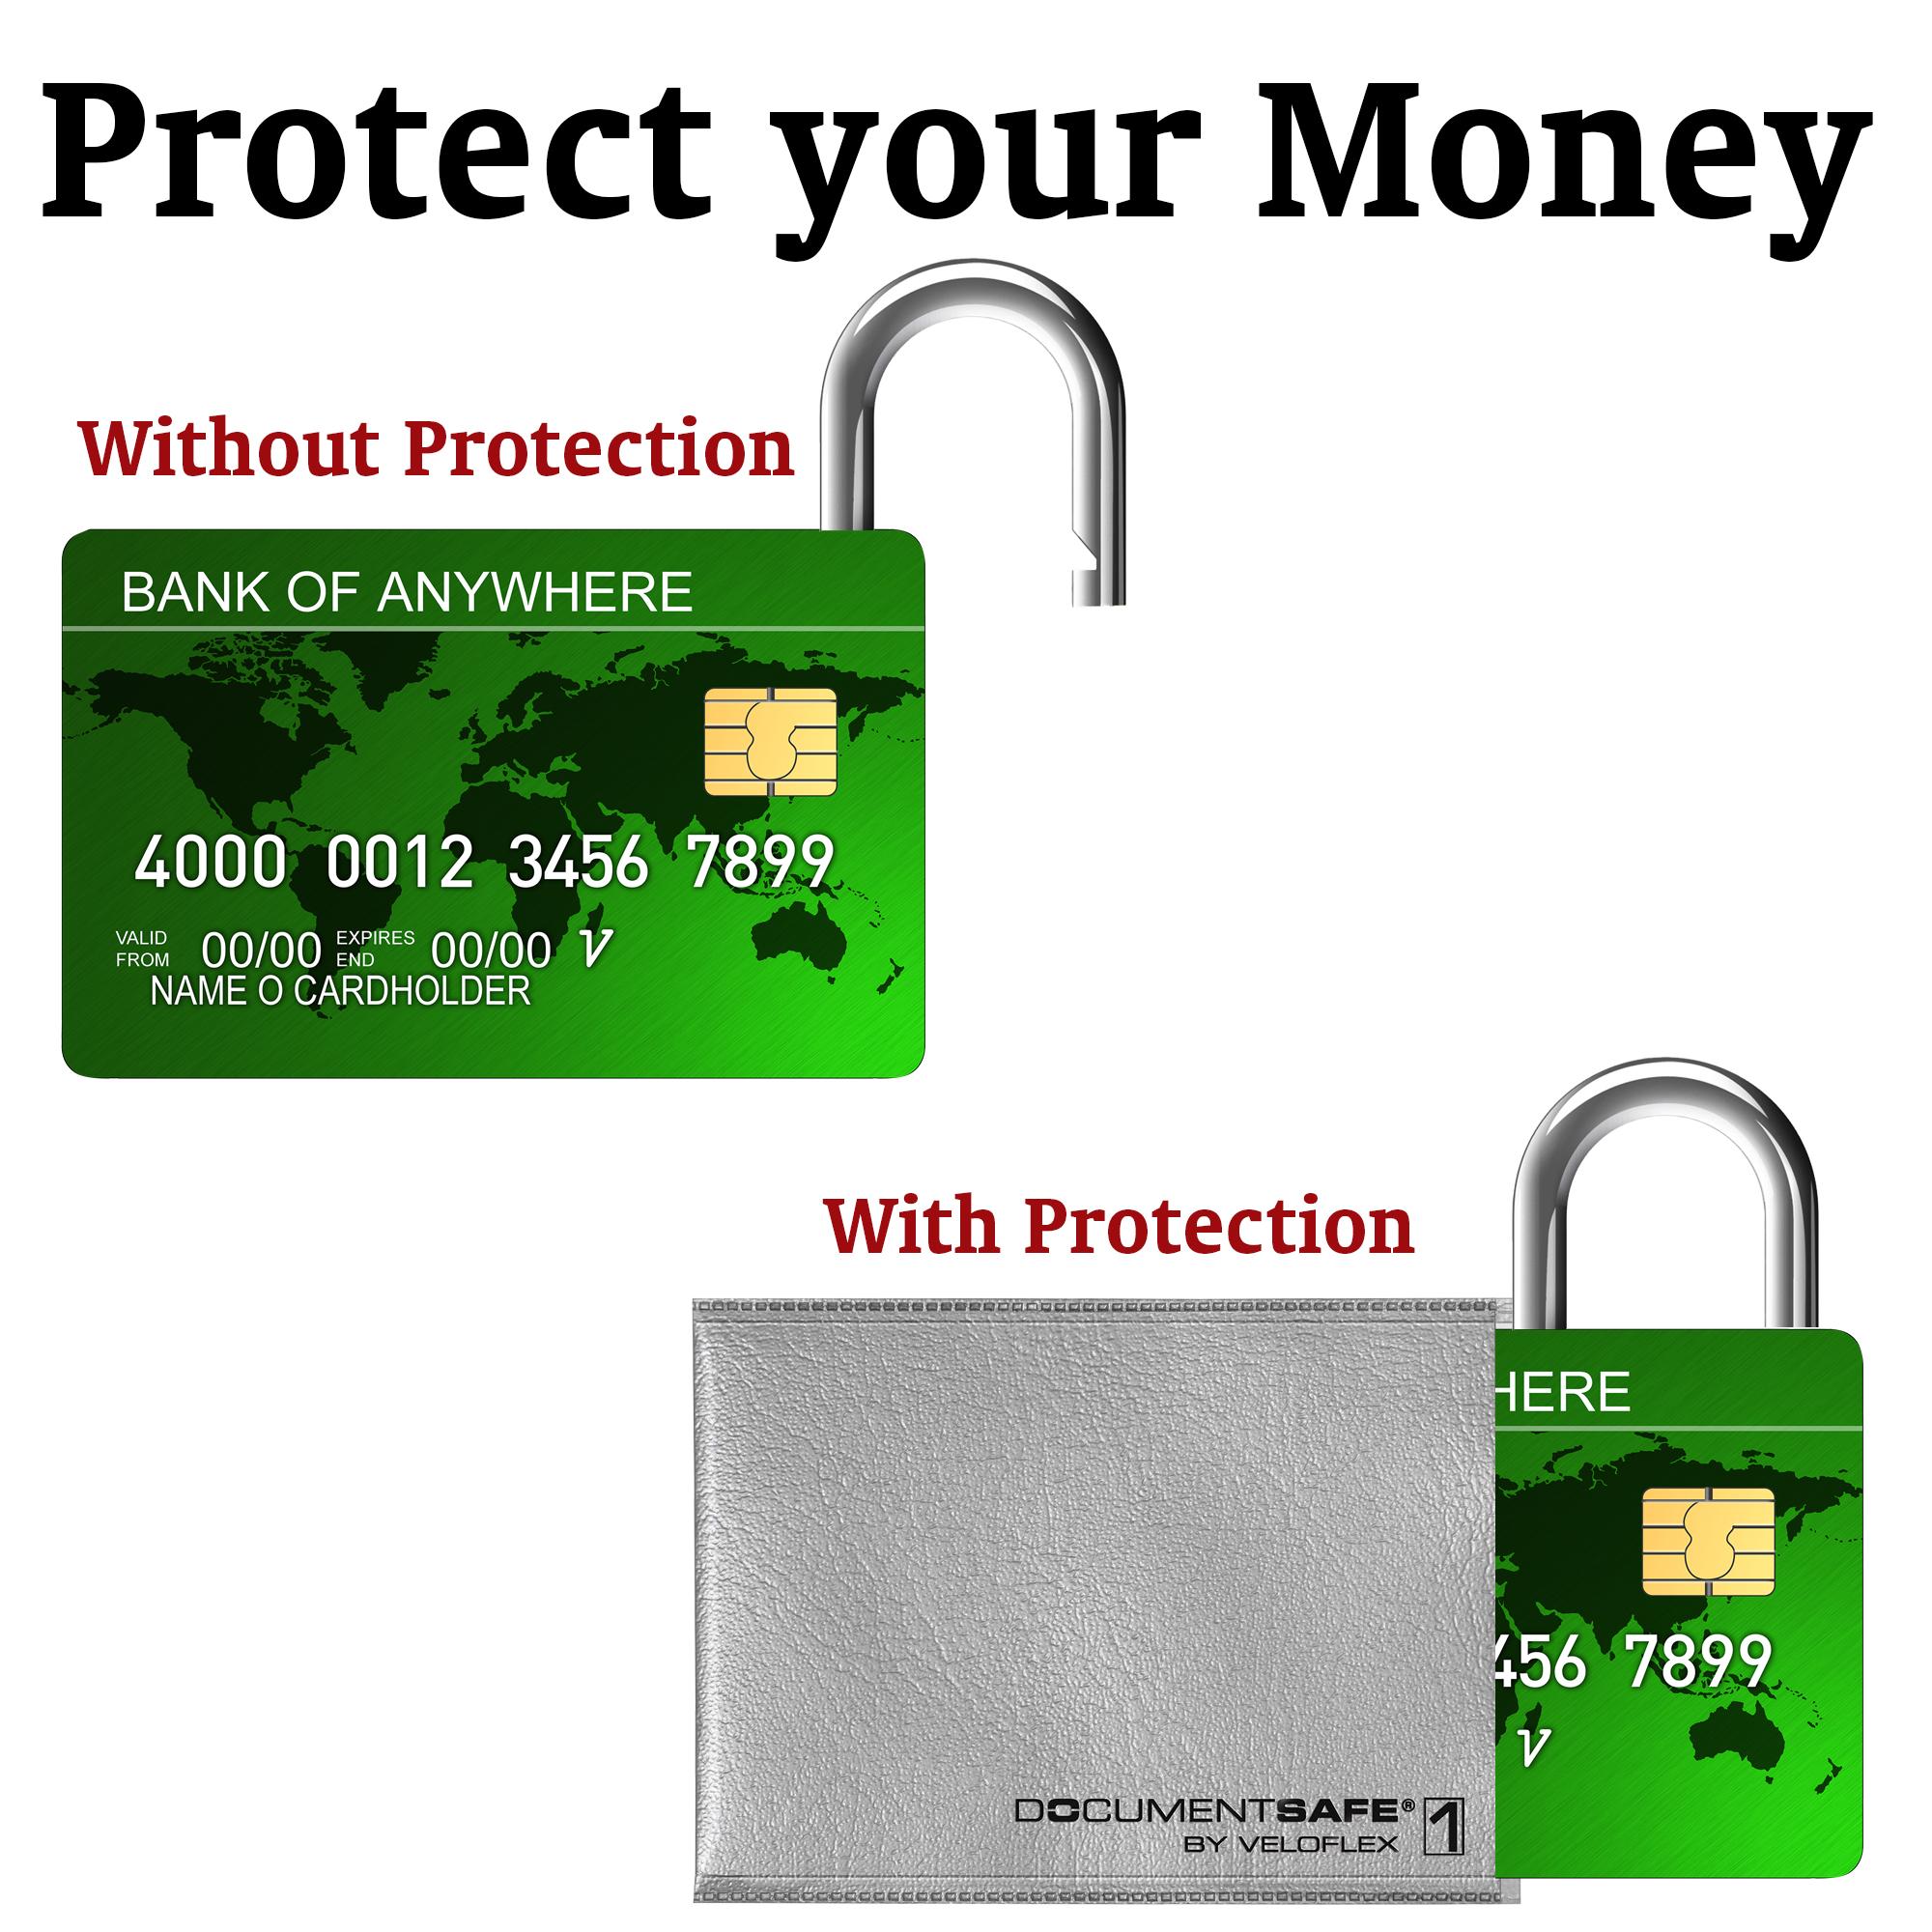 Single Protective Cover against Data Theft for Credit Cards - pk of 2